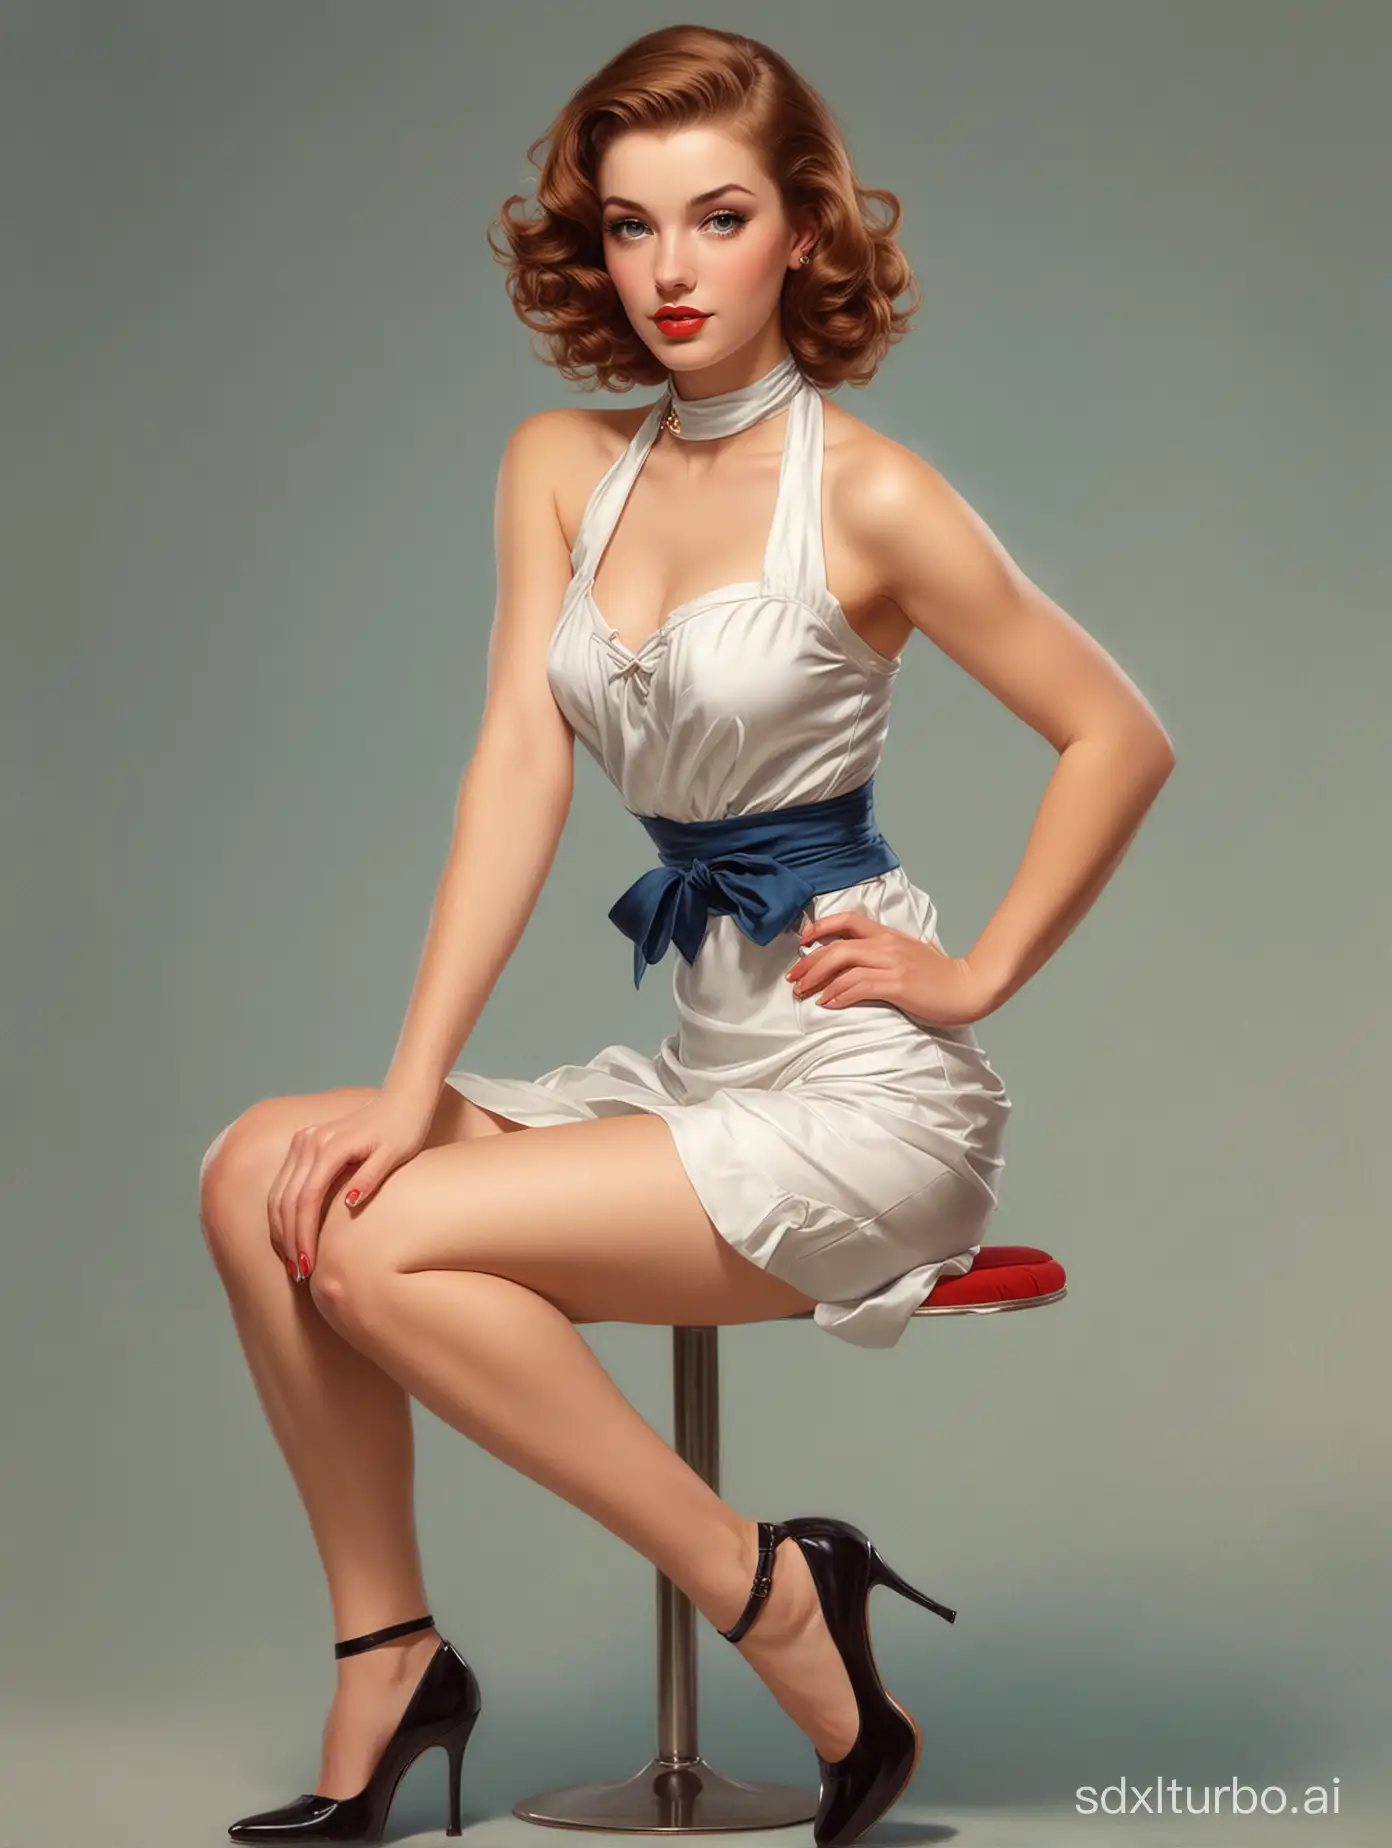 Elegant-PinUp-Portrait-of-a-Beautiful-Young-Woman-in-Gil-Elvgren-Style